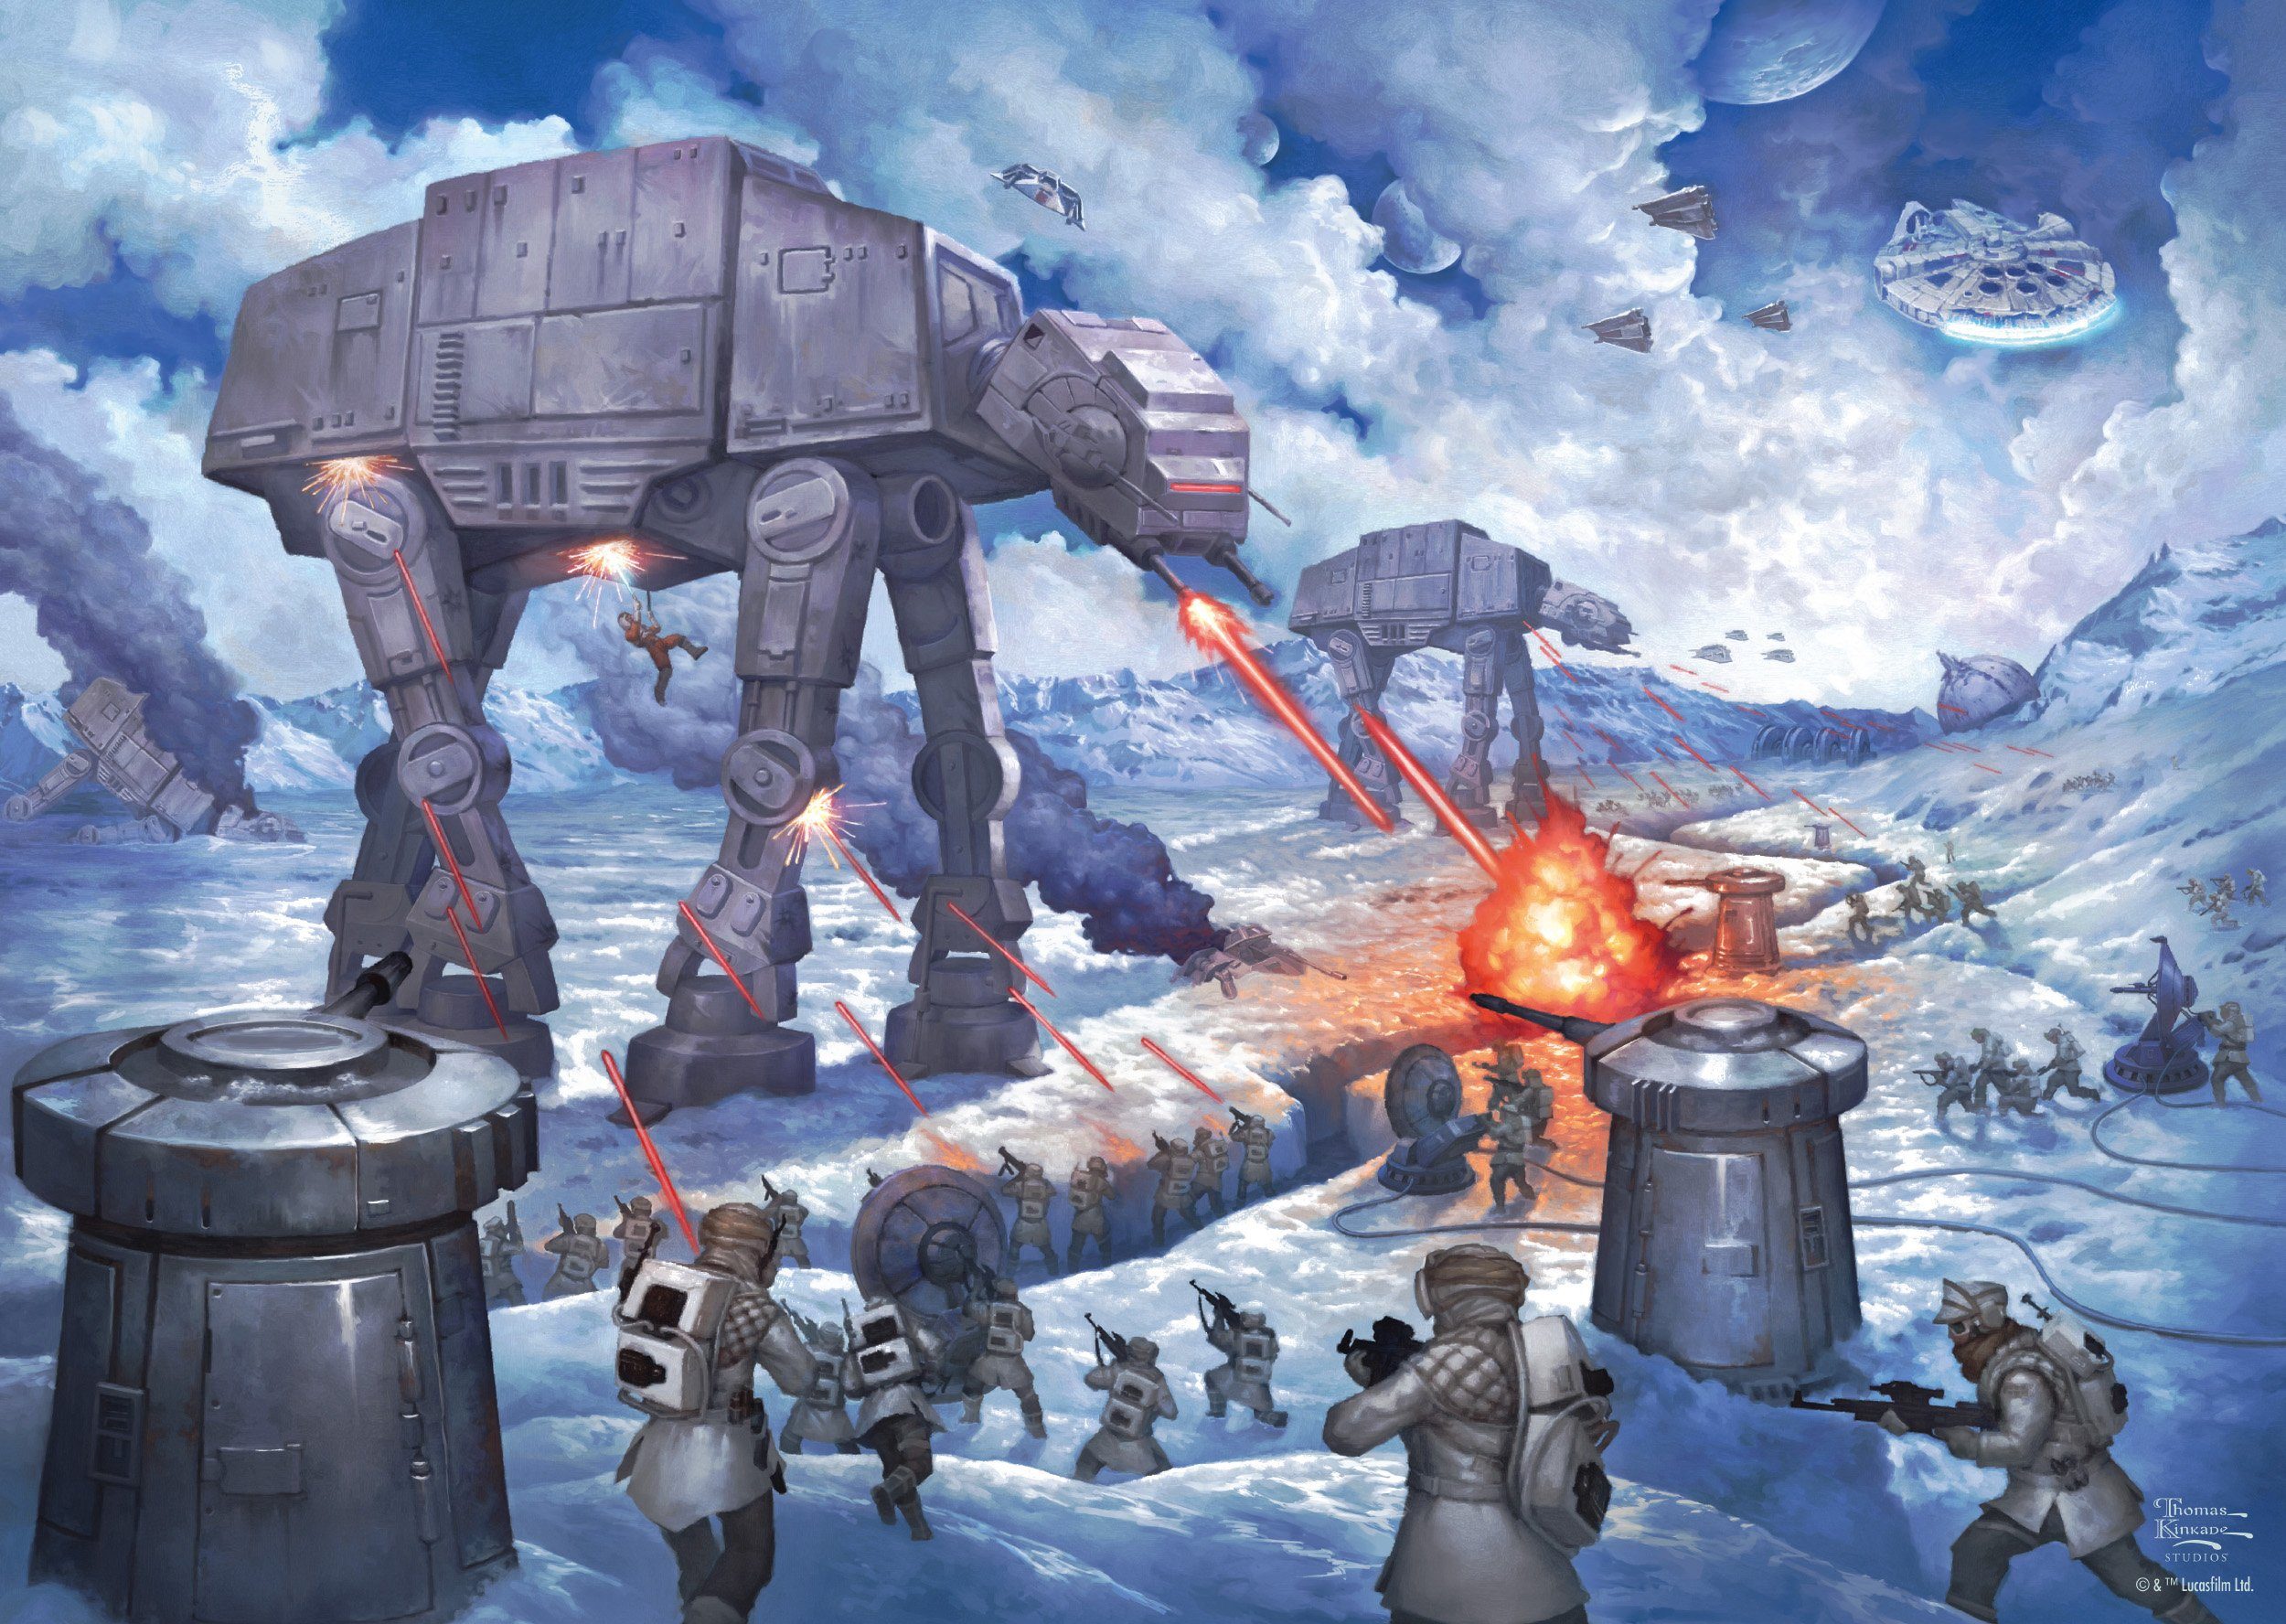 in Battle Puzzleteile, of Made Schmidt Hoth, Puzzle Spiele The Europe 1000